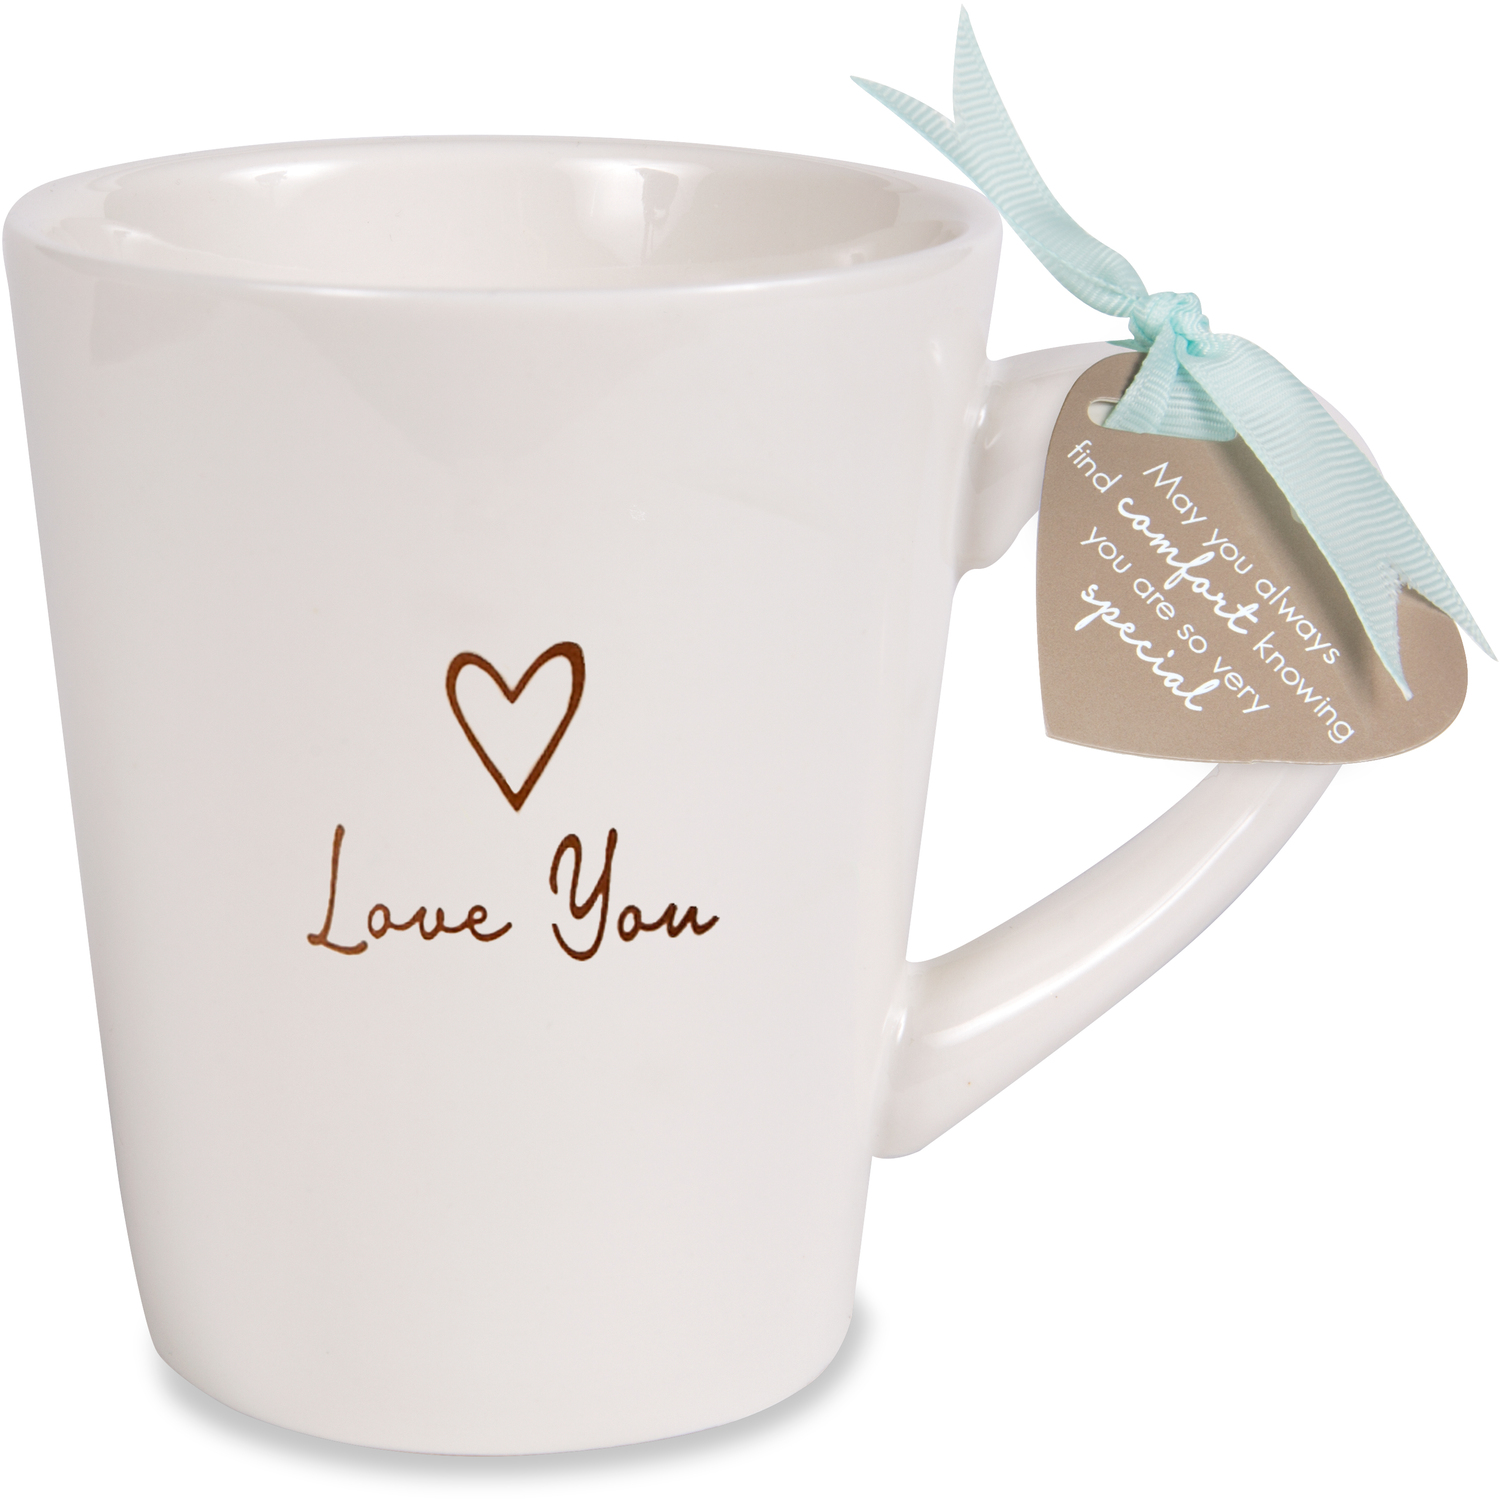 Love You by Comfort Collection - Love You - 15 oz Cup